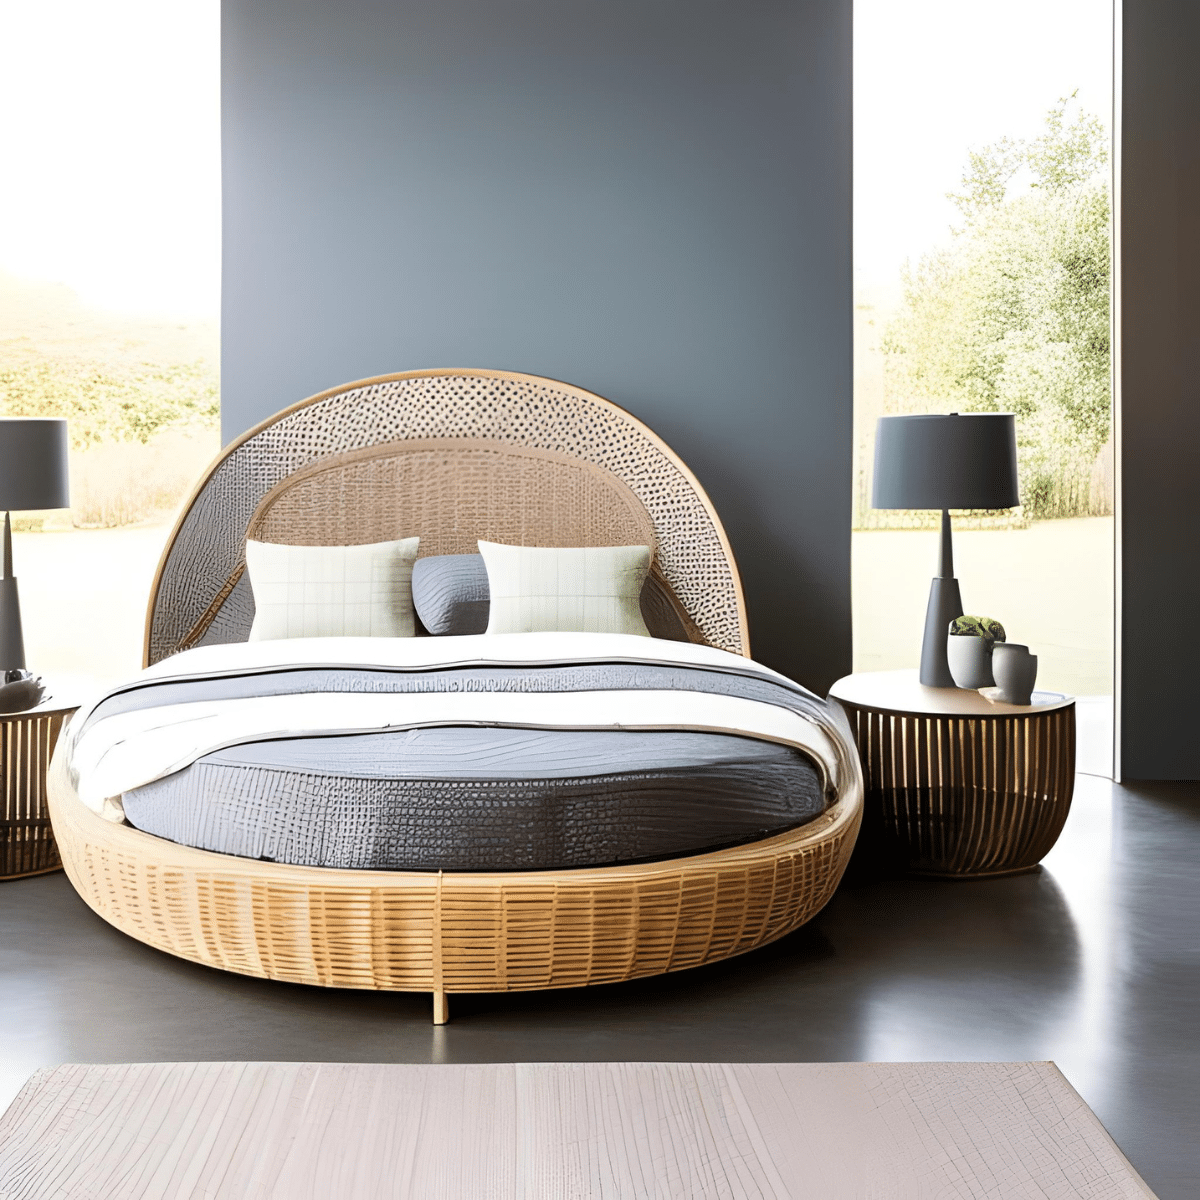 Rattan bed with grey and off-white bedding